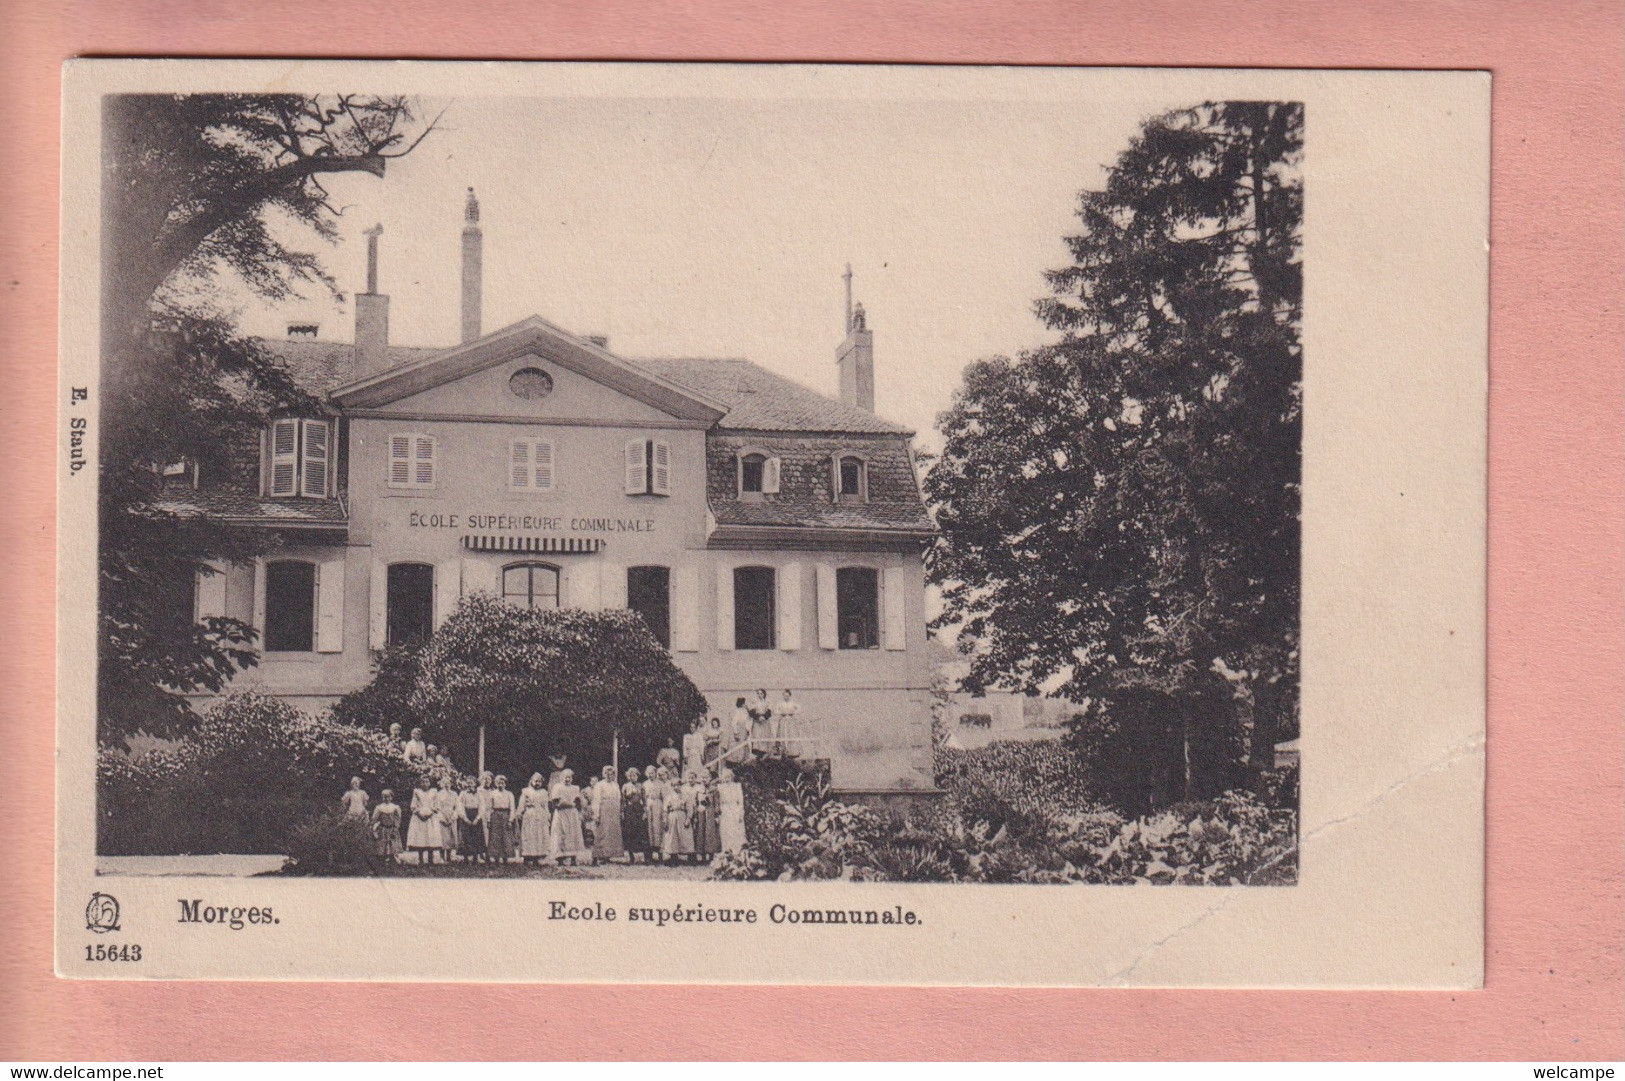 OUDE POSTKAART - ZWITSERLAND -  MORGES - ECOLE SUPERIEURE  1900'S - With Faults - Morges